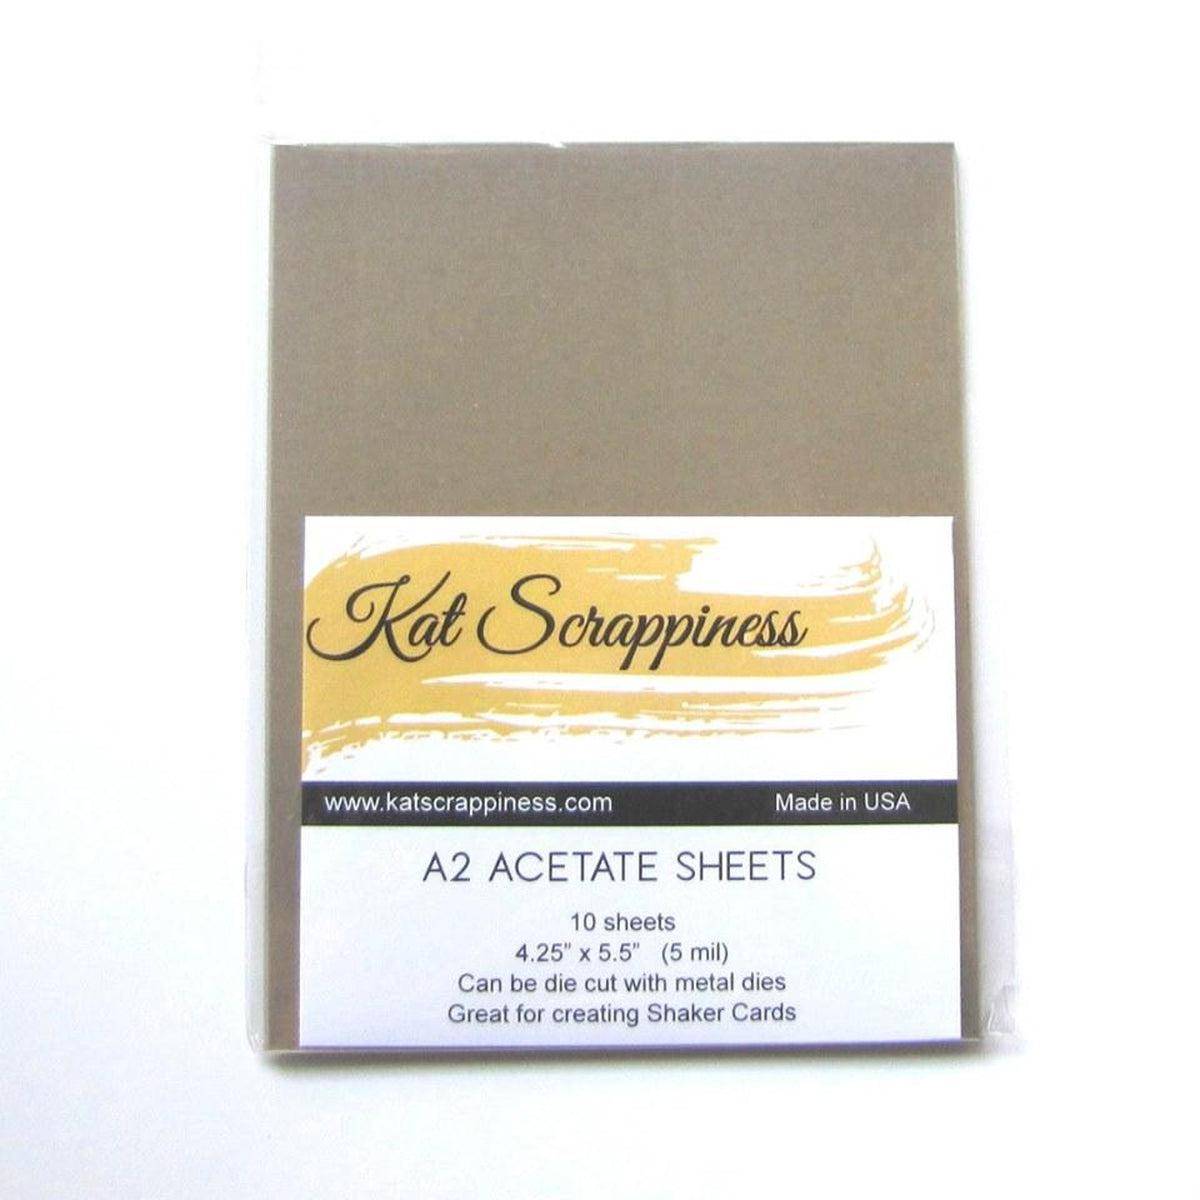 A2 Acetate Sheets - 10pc - Kat Scrappiness